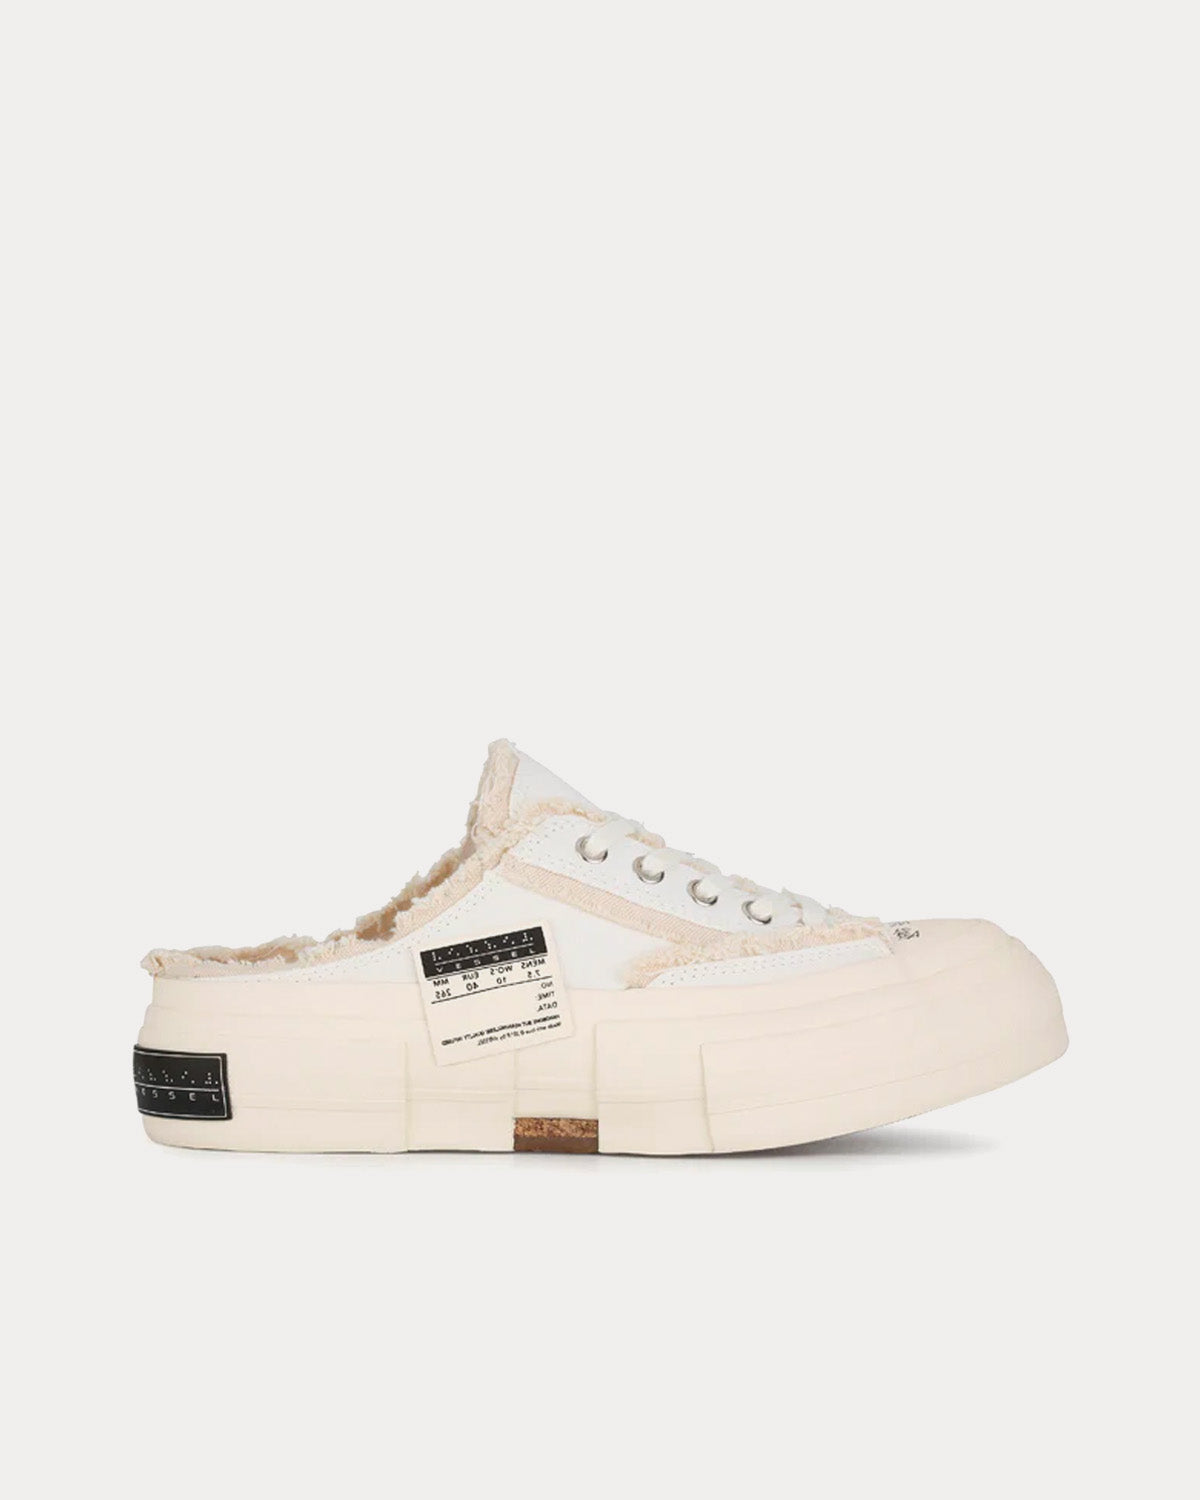 xVESSEL - G.O.P. White Slip On Sneakers